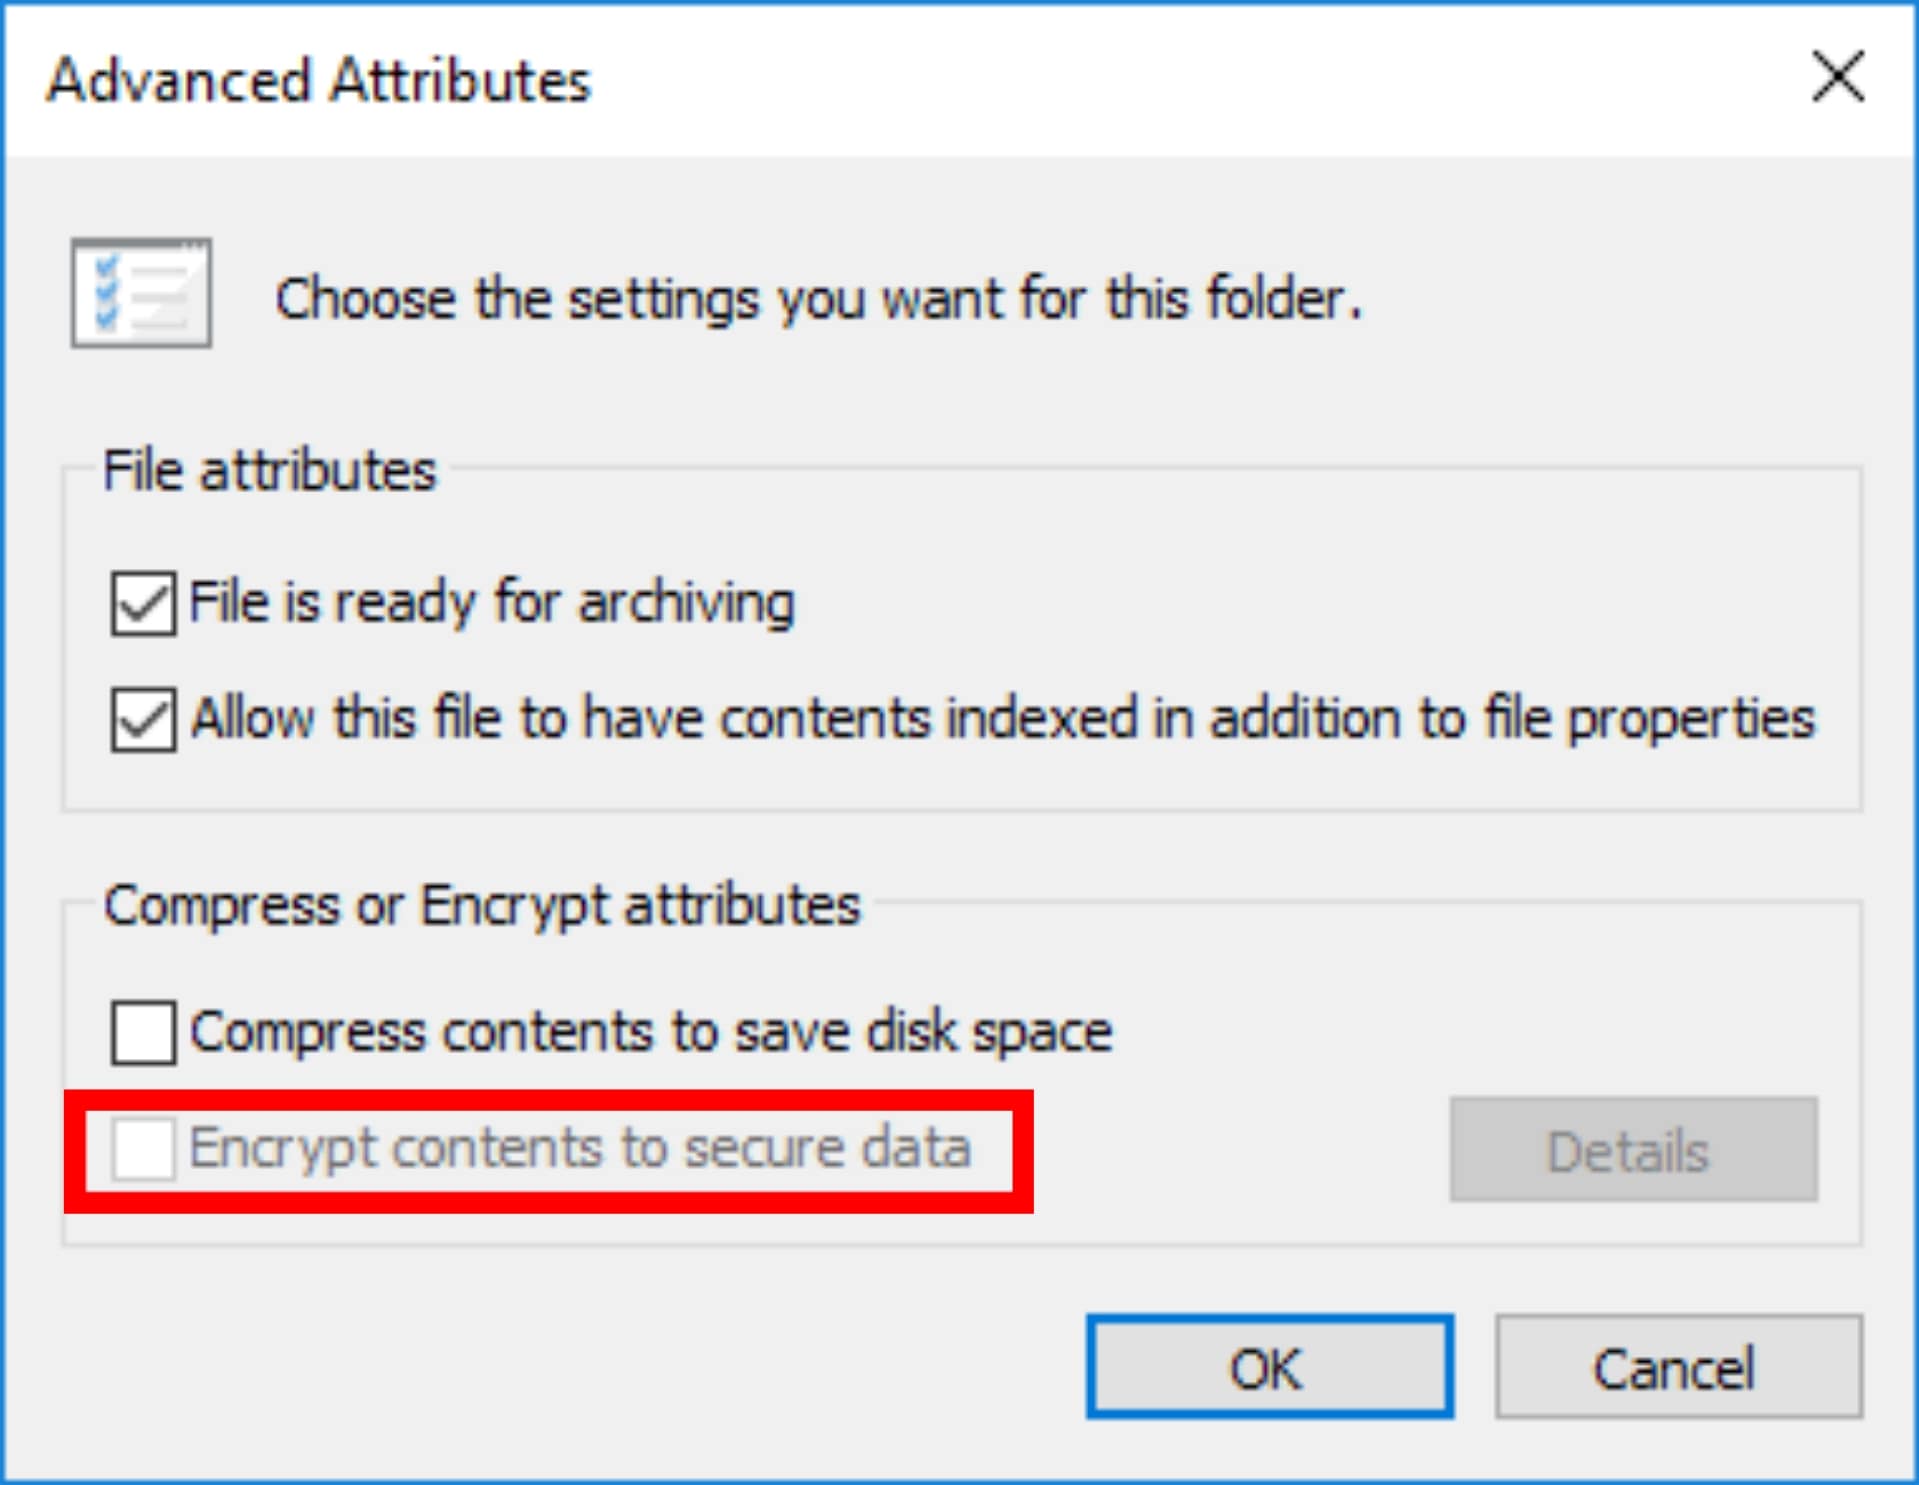 How to Fix Encrypt Contents to Secure Data Greyed Out in Windows 10.